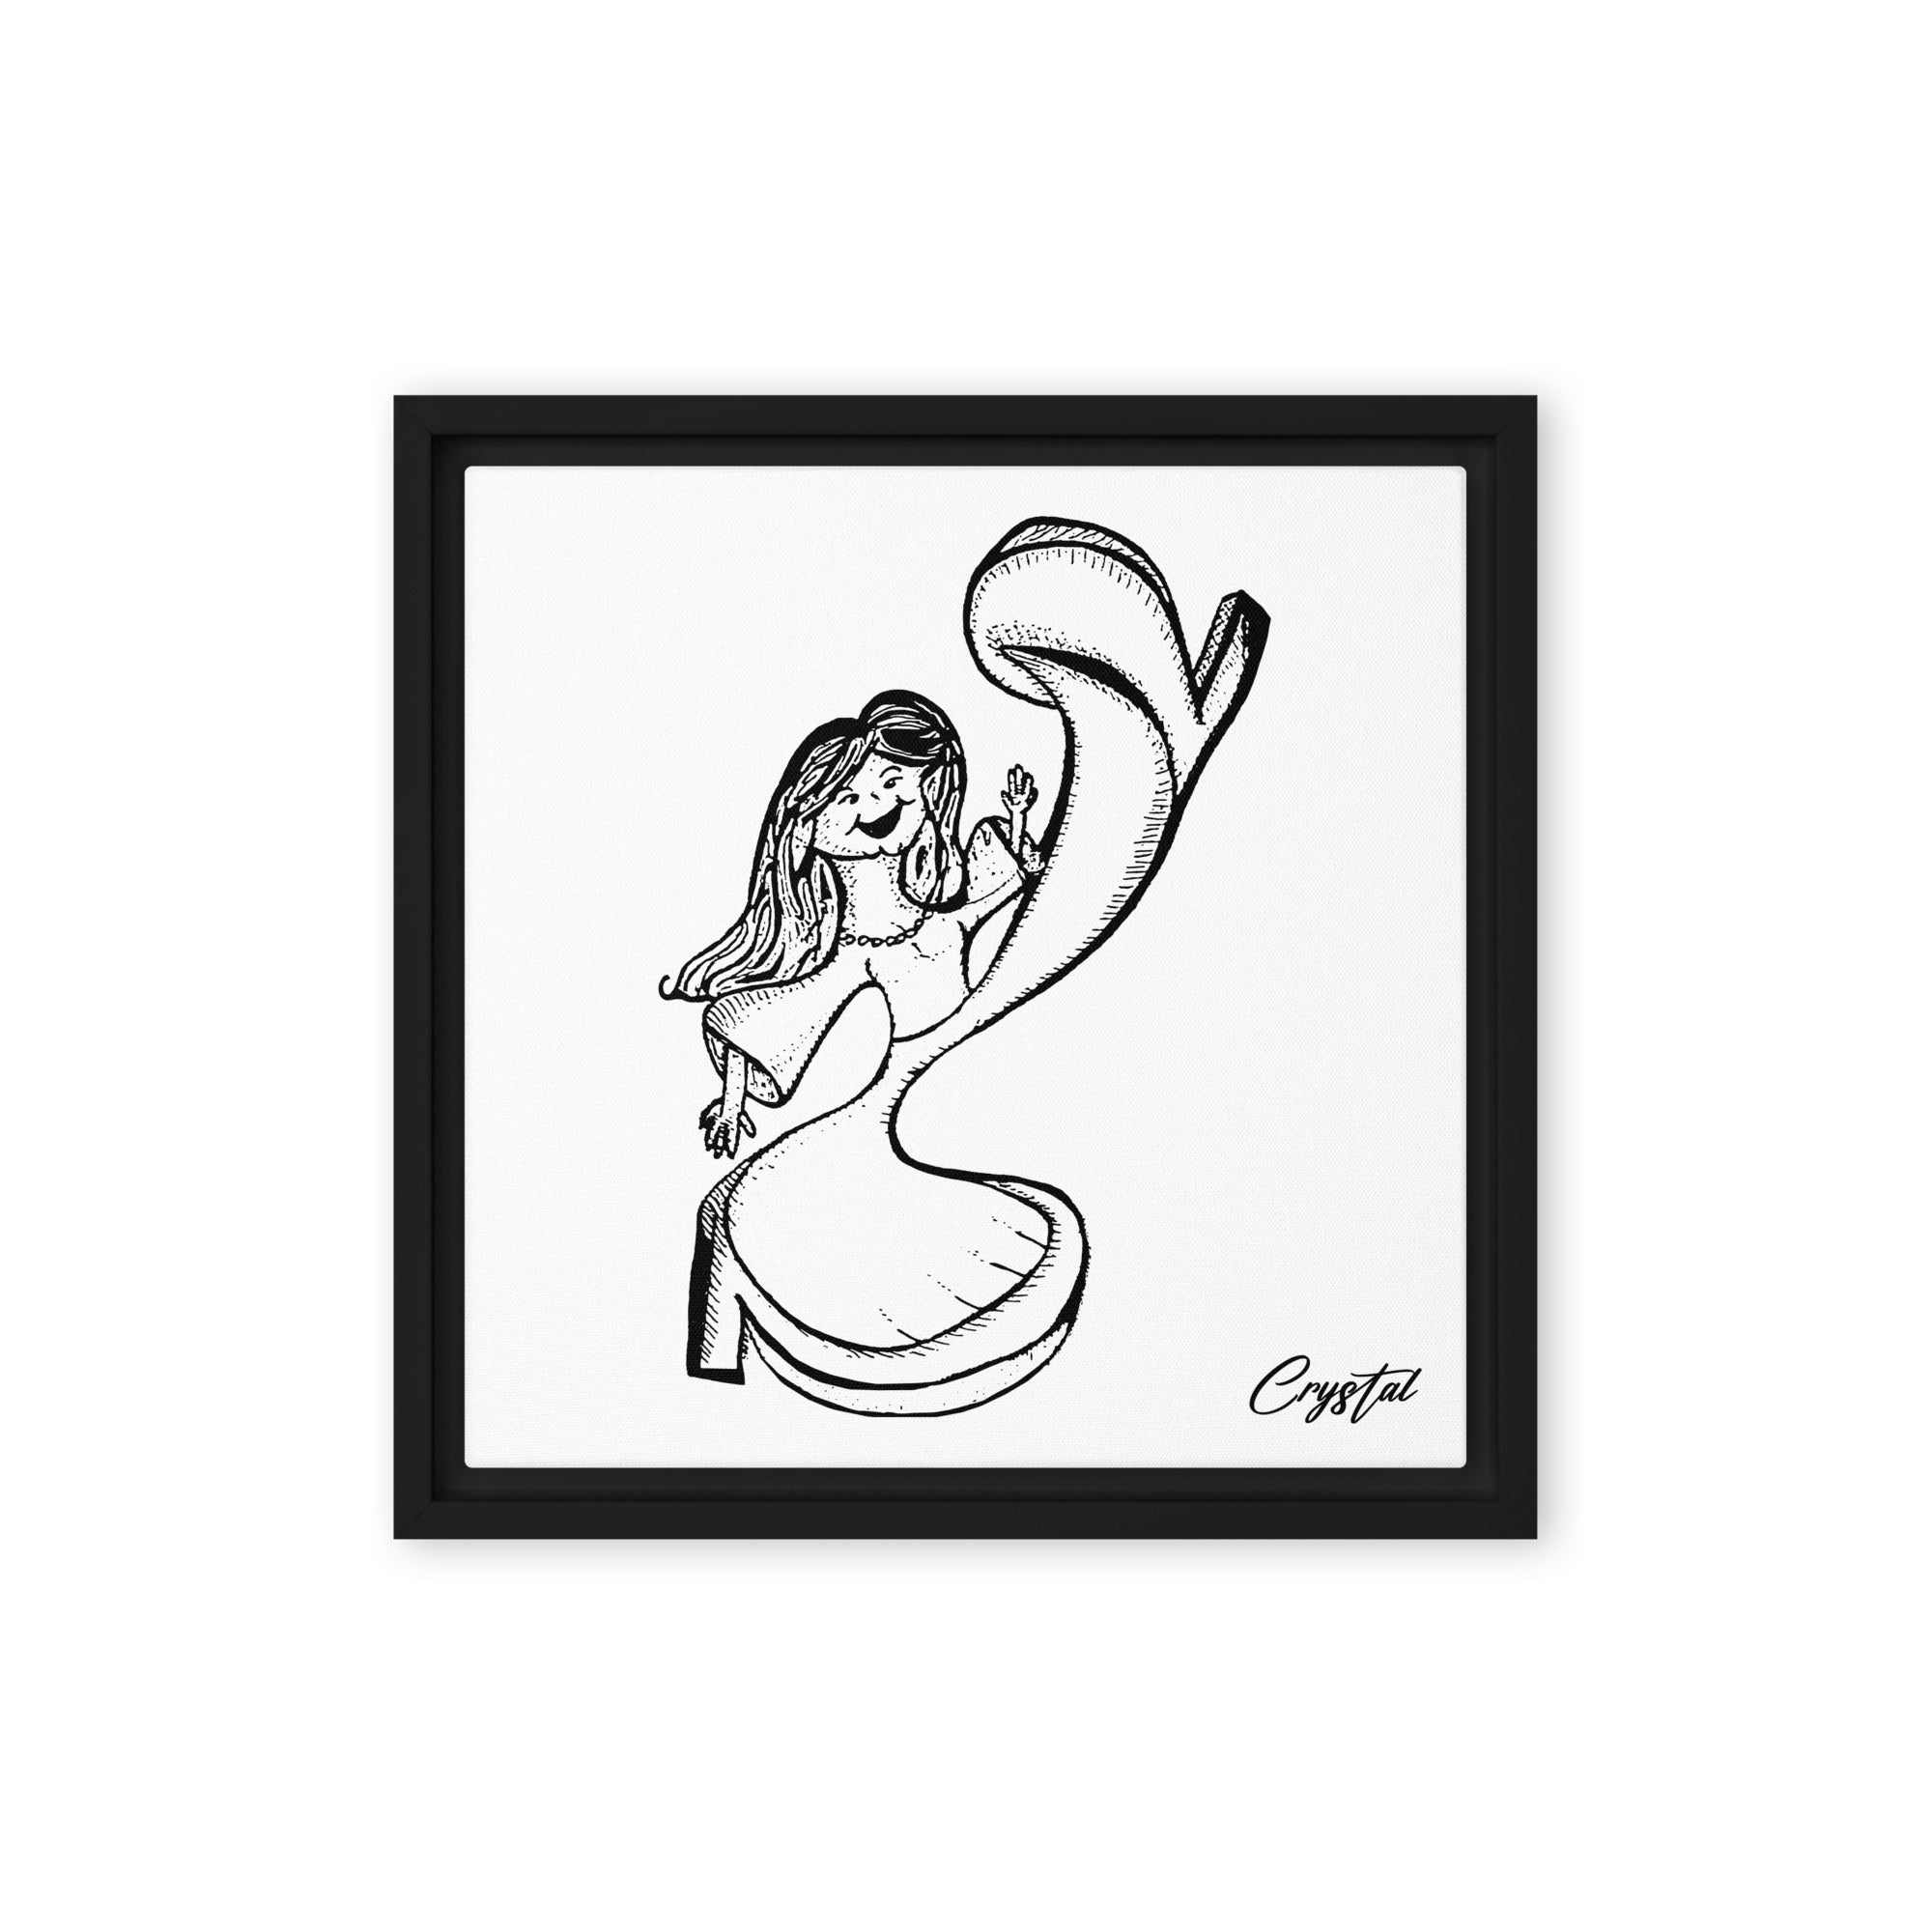 Abstract Drawing of Happy Girl or Woman Dancing and Kicking - Cute & Creepy "Stay Weird" Cartoon Illustration Framed canvas